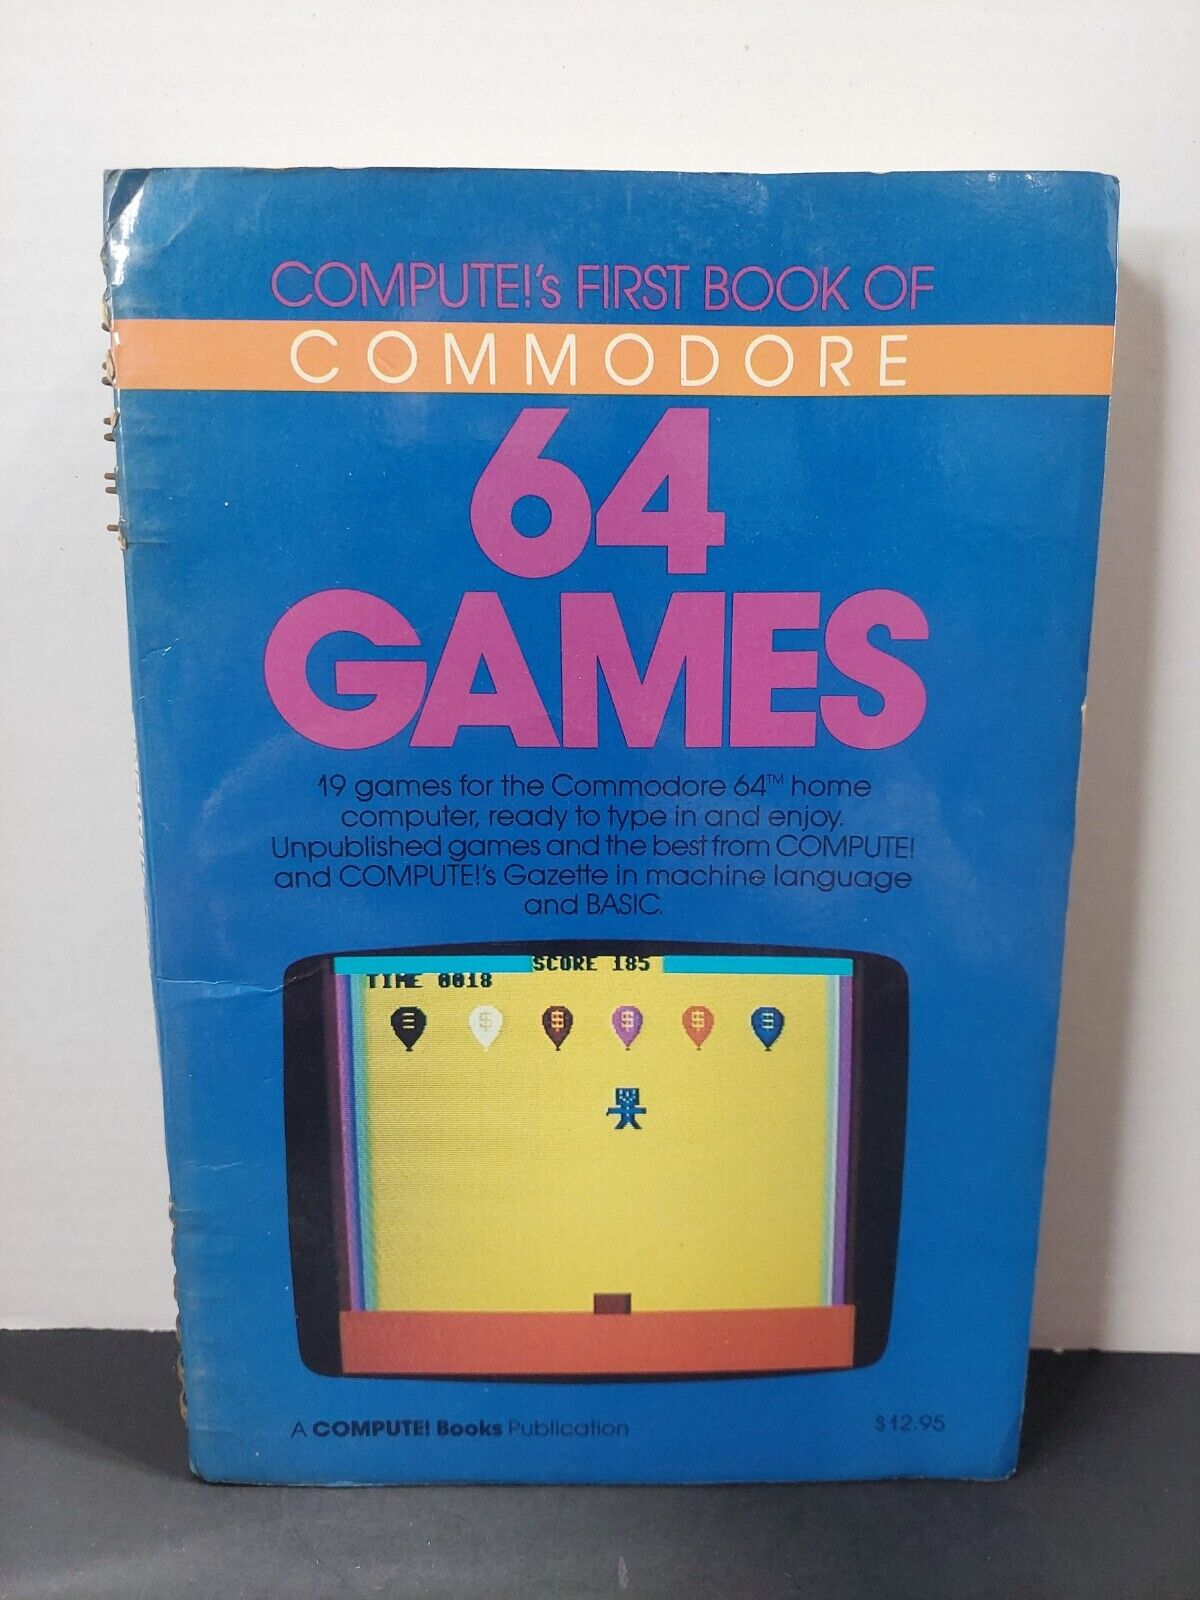 Vintage Computers First Book of Commodore 64 Games 1983 RARE